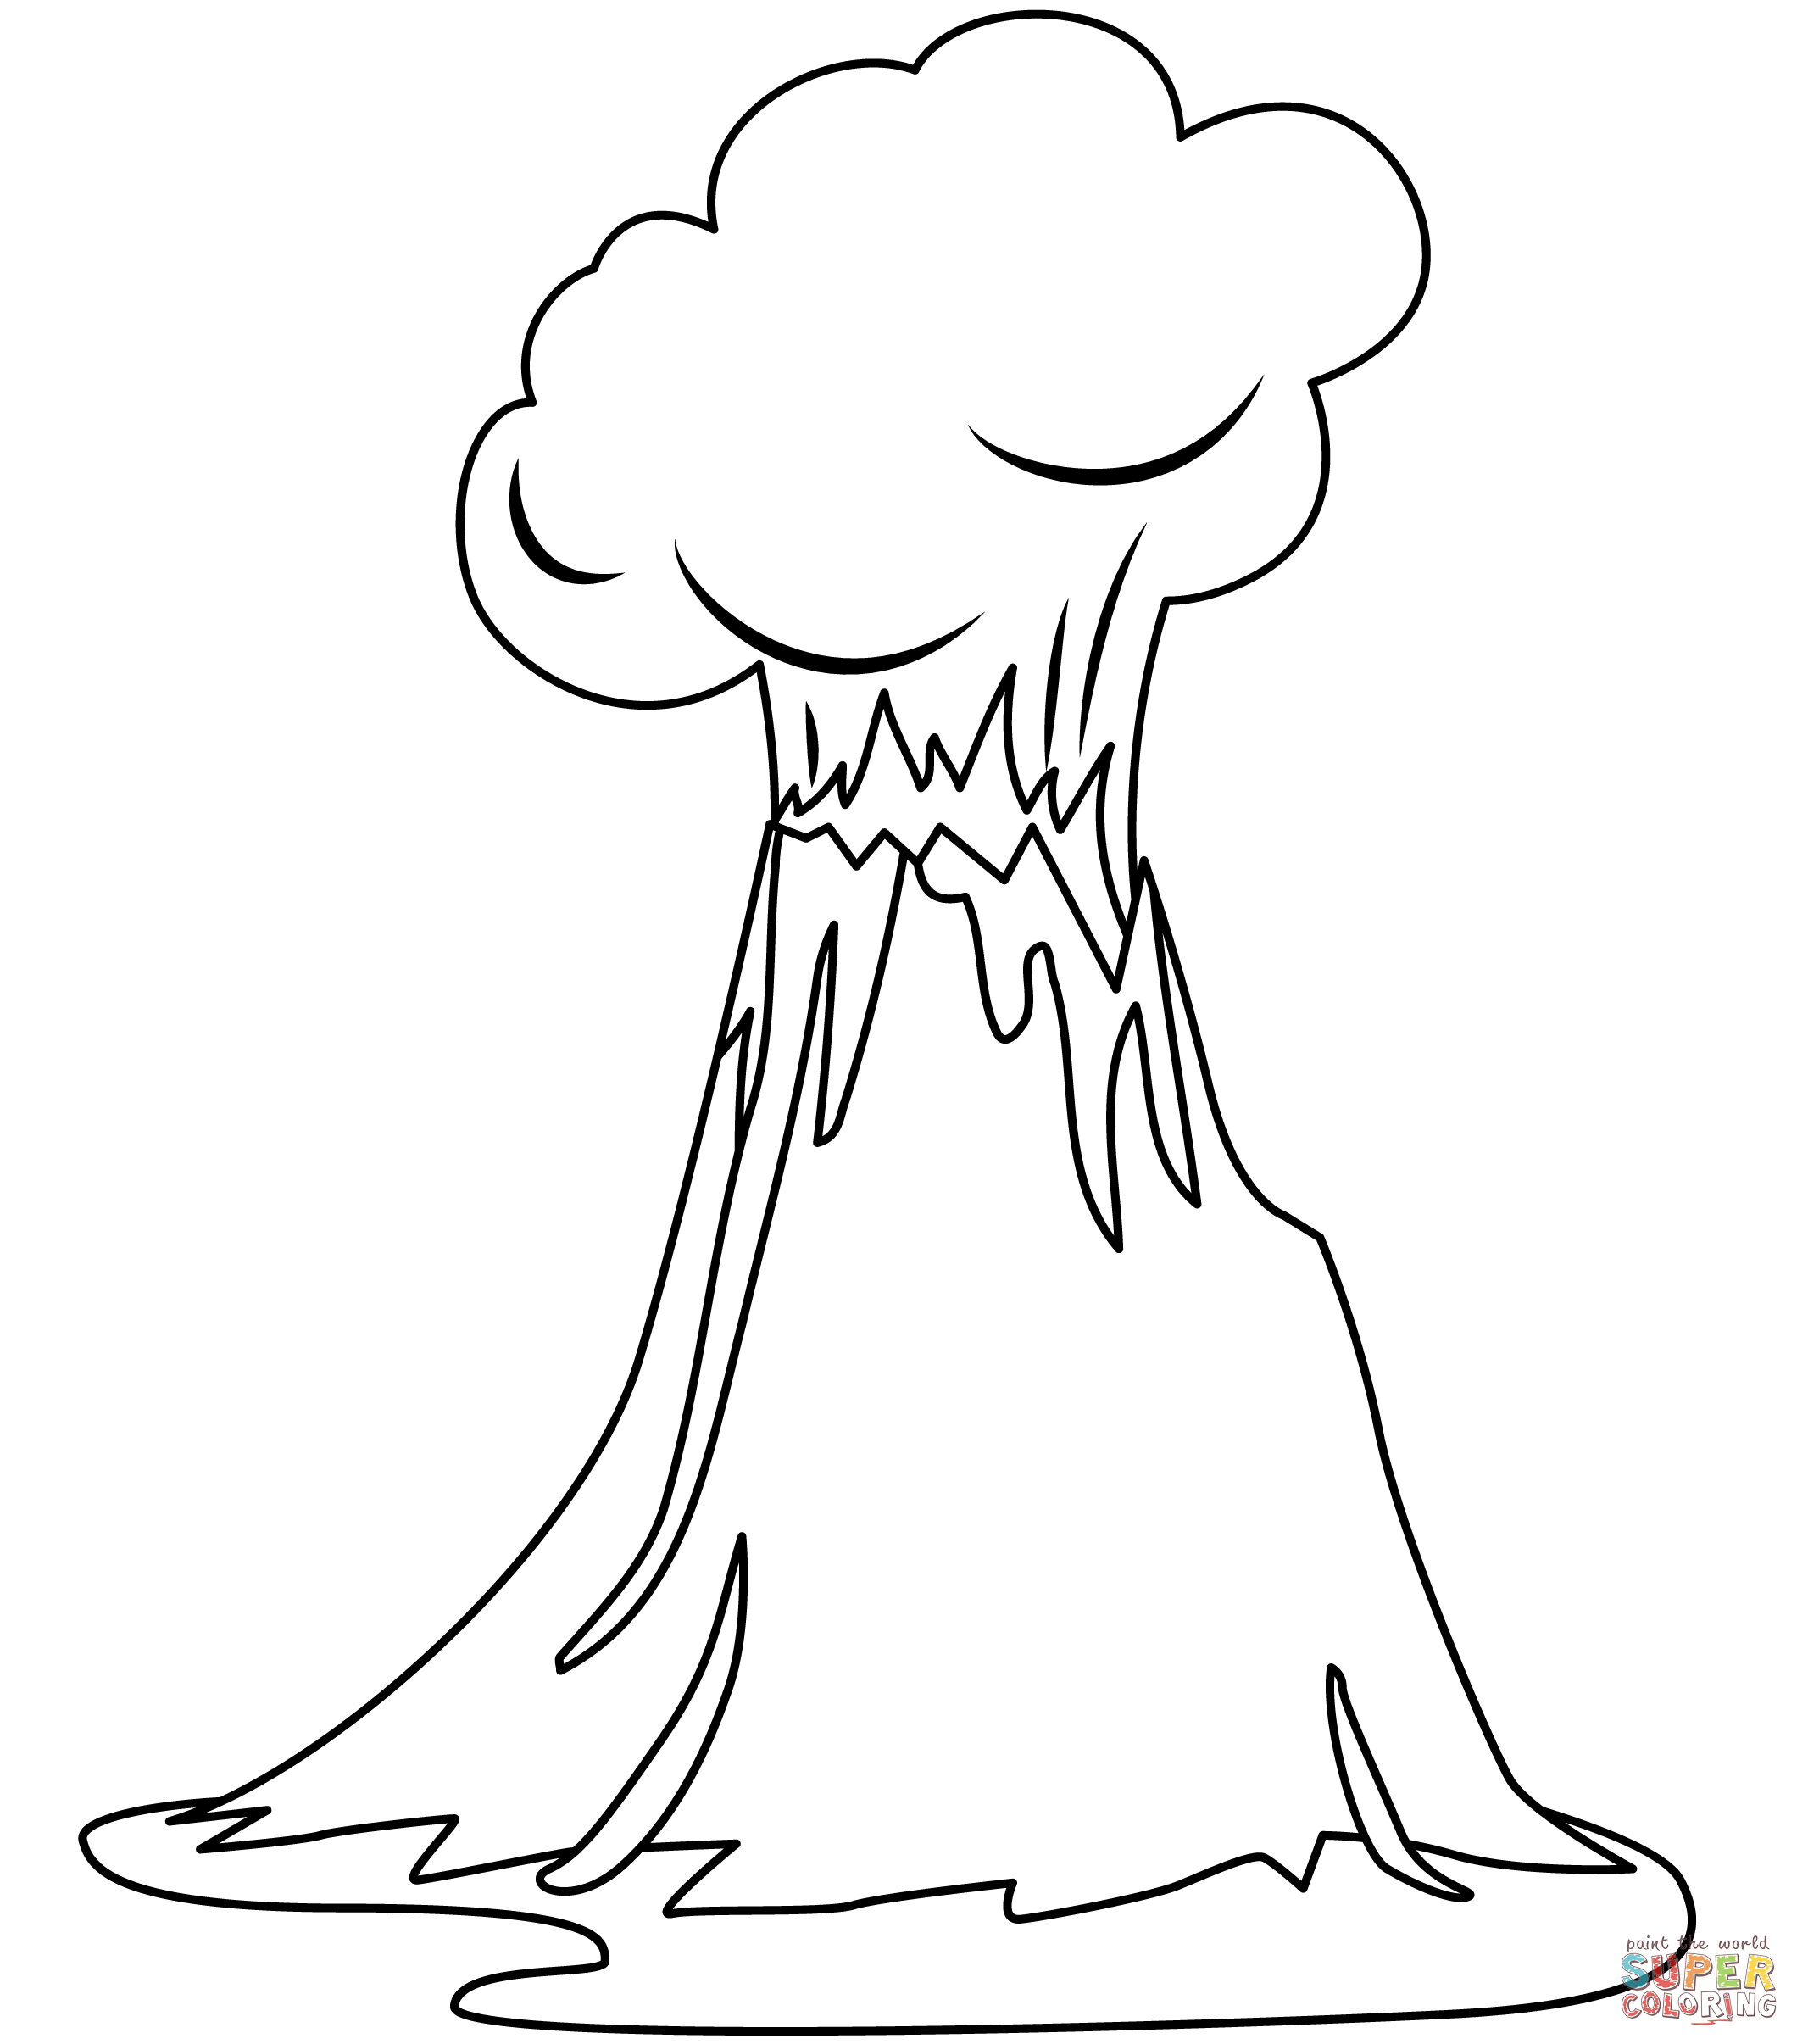 Volcano coloring page free printable coloring pages